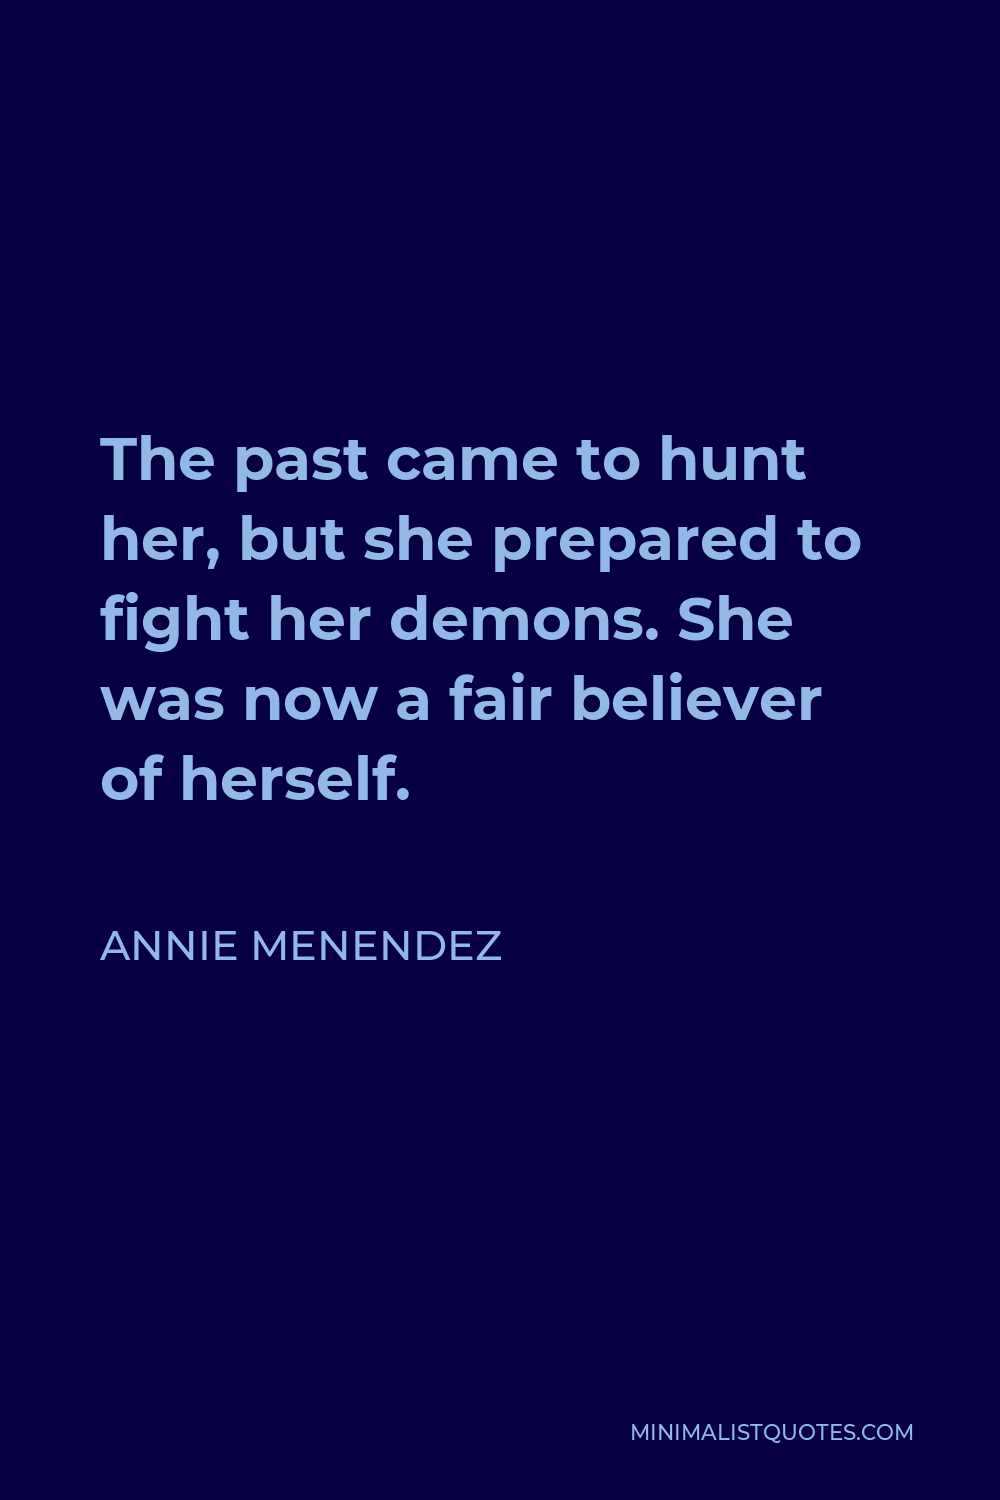 Annie Menendez Quote - The past came to hunt her, but she prepared to fight her demons. She was now a fair believer of herself.